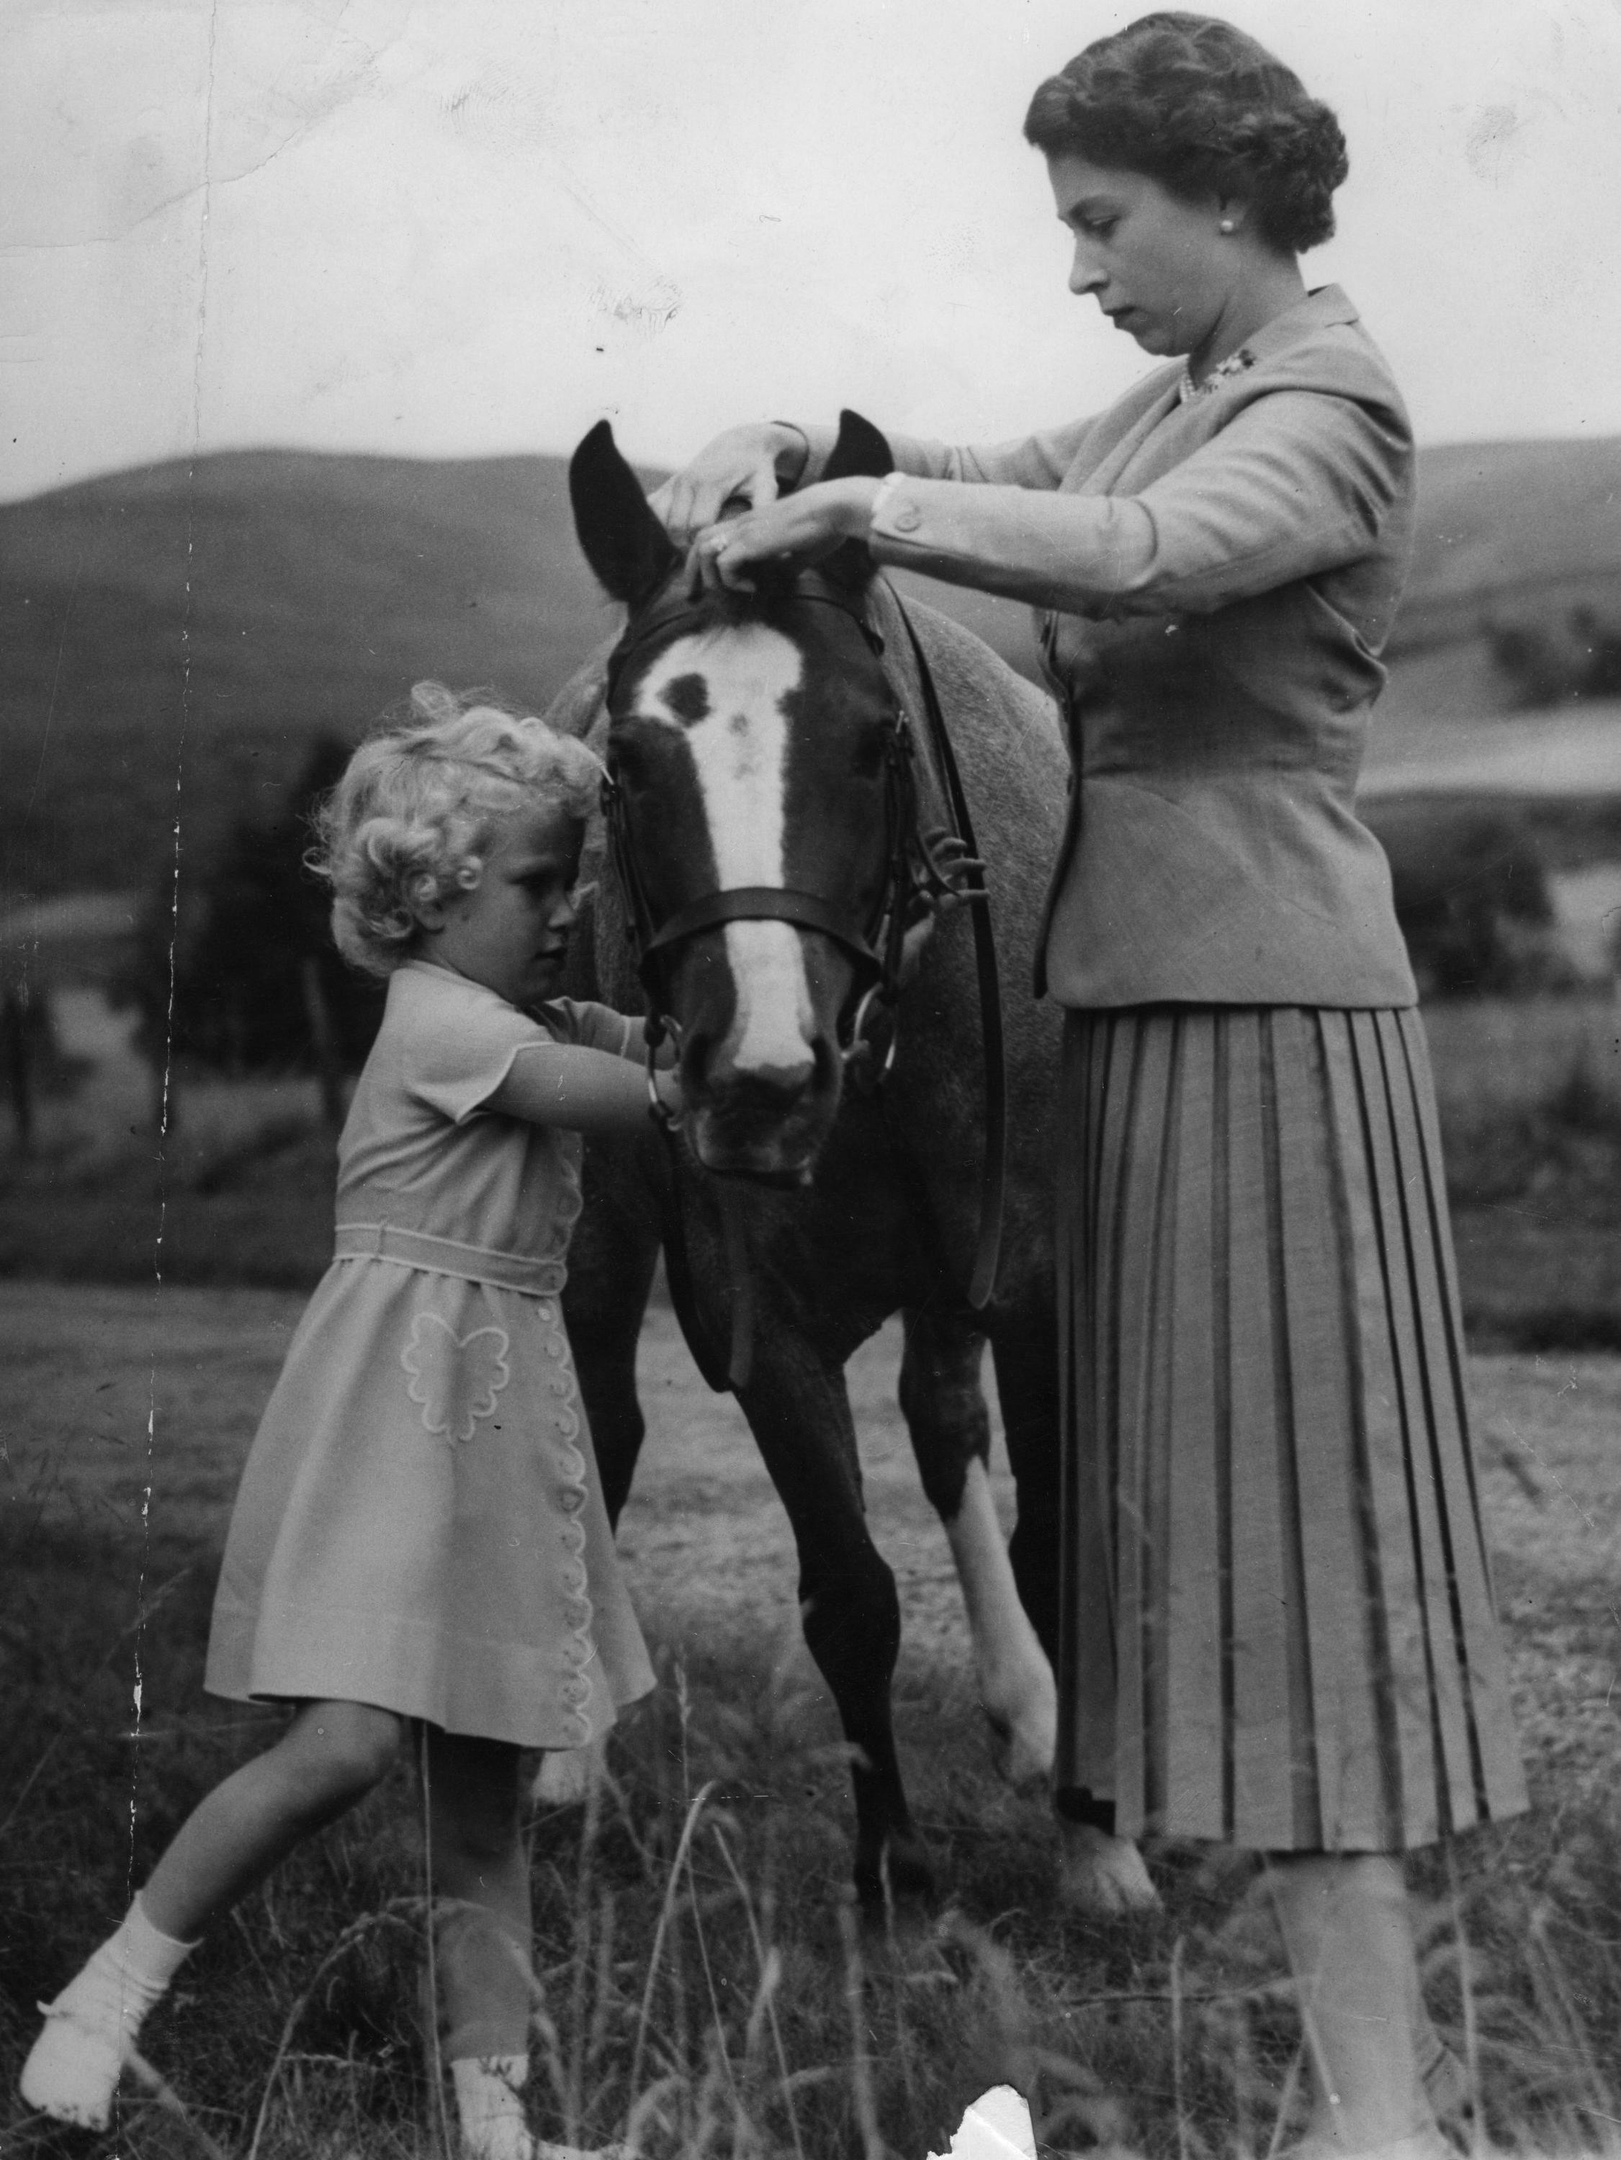 1955 of Princess Anne helping her mother, Queen Elizabeth II, fit the bridle to the pony 'Greensleeves', the the grounds of Balmoral Castle during the Royal family's summer holiday in Scotland.